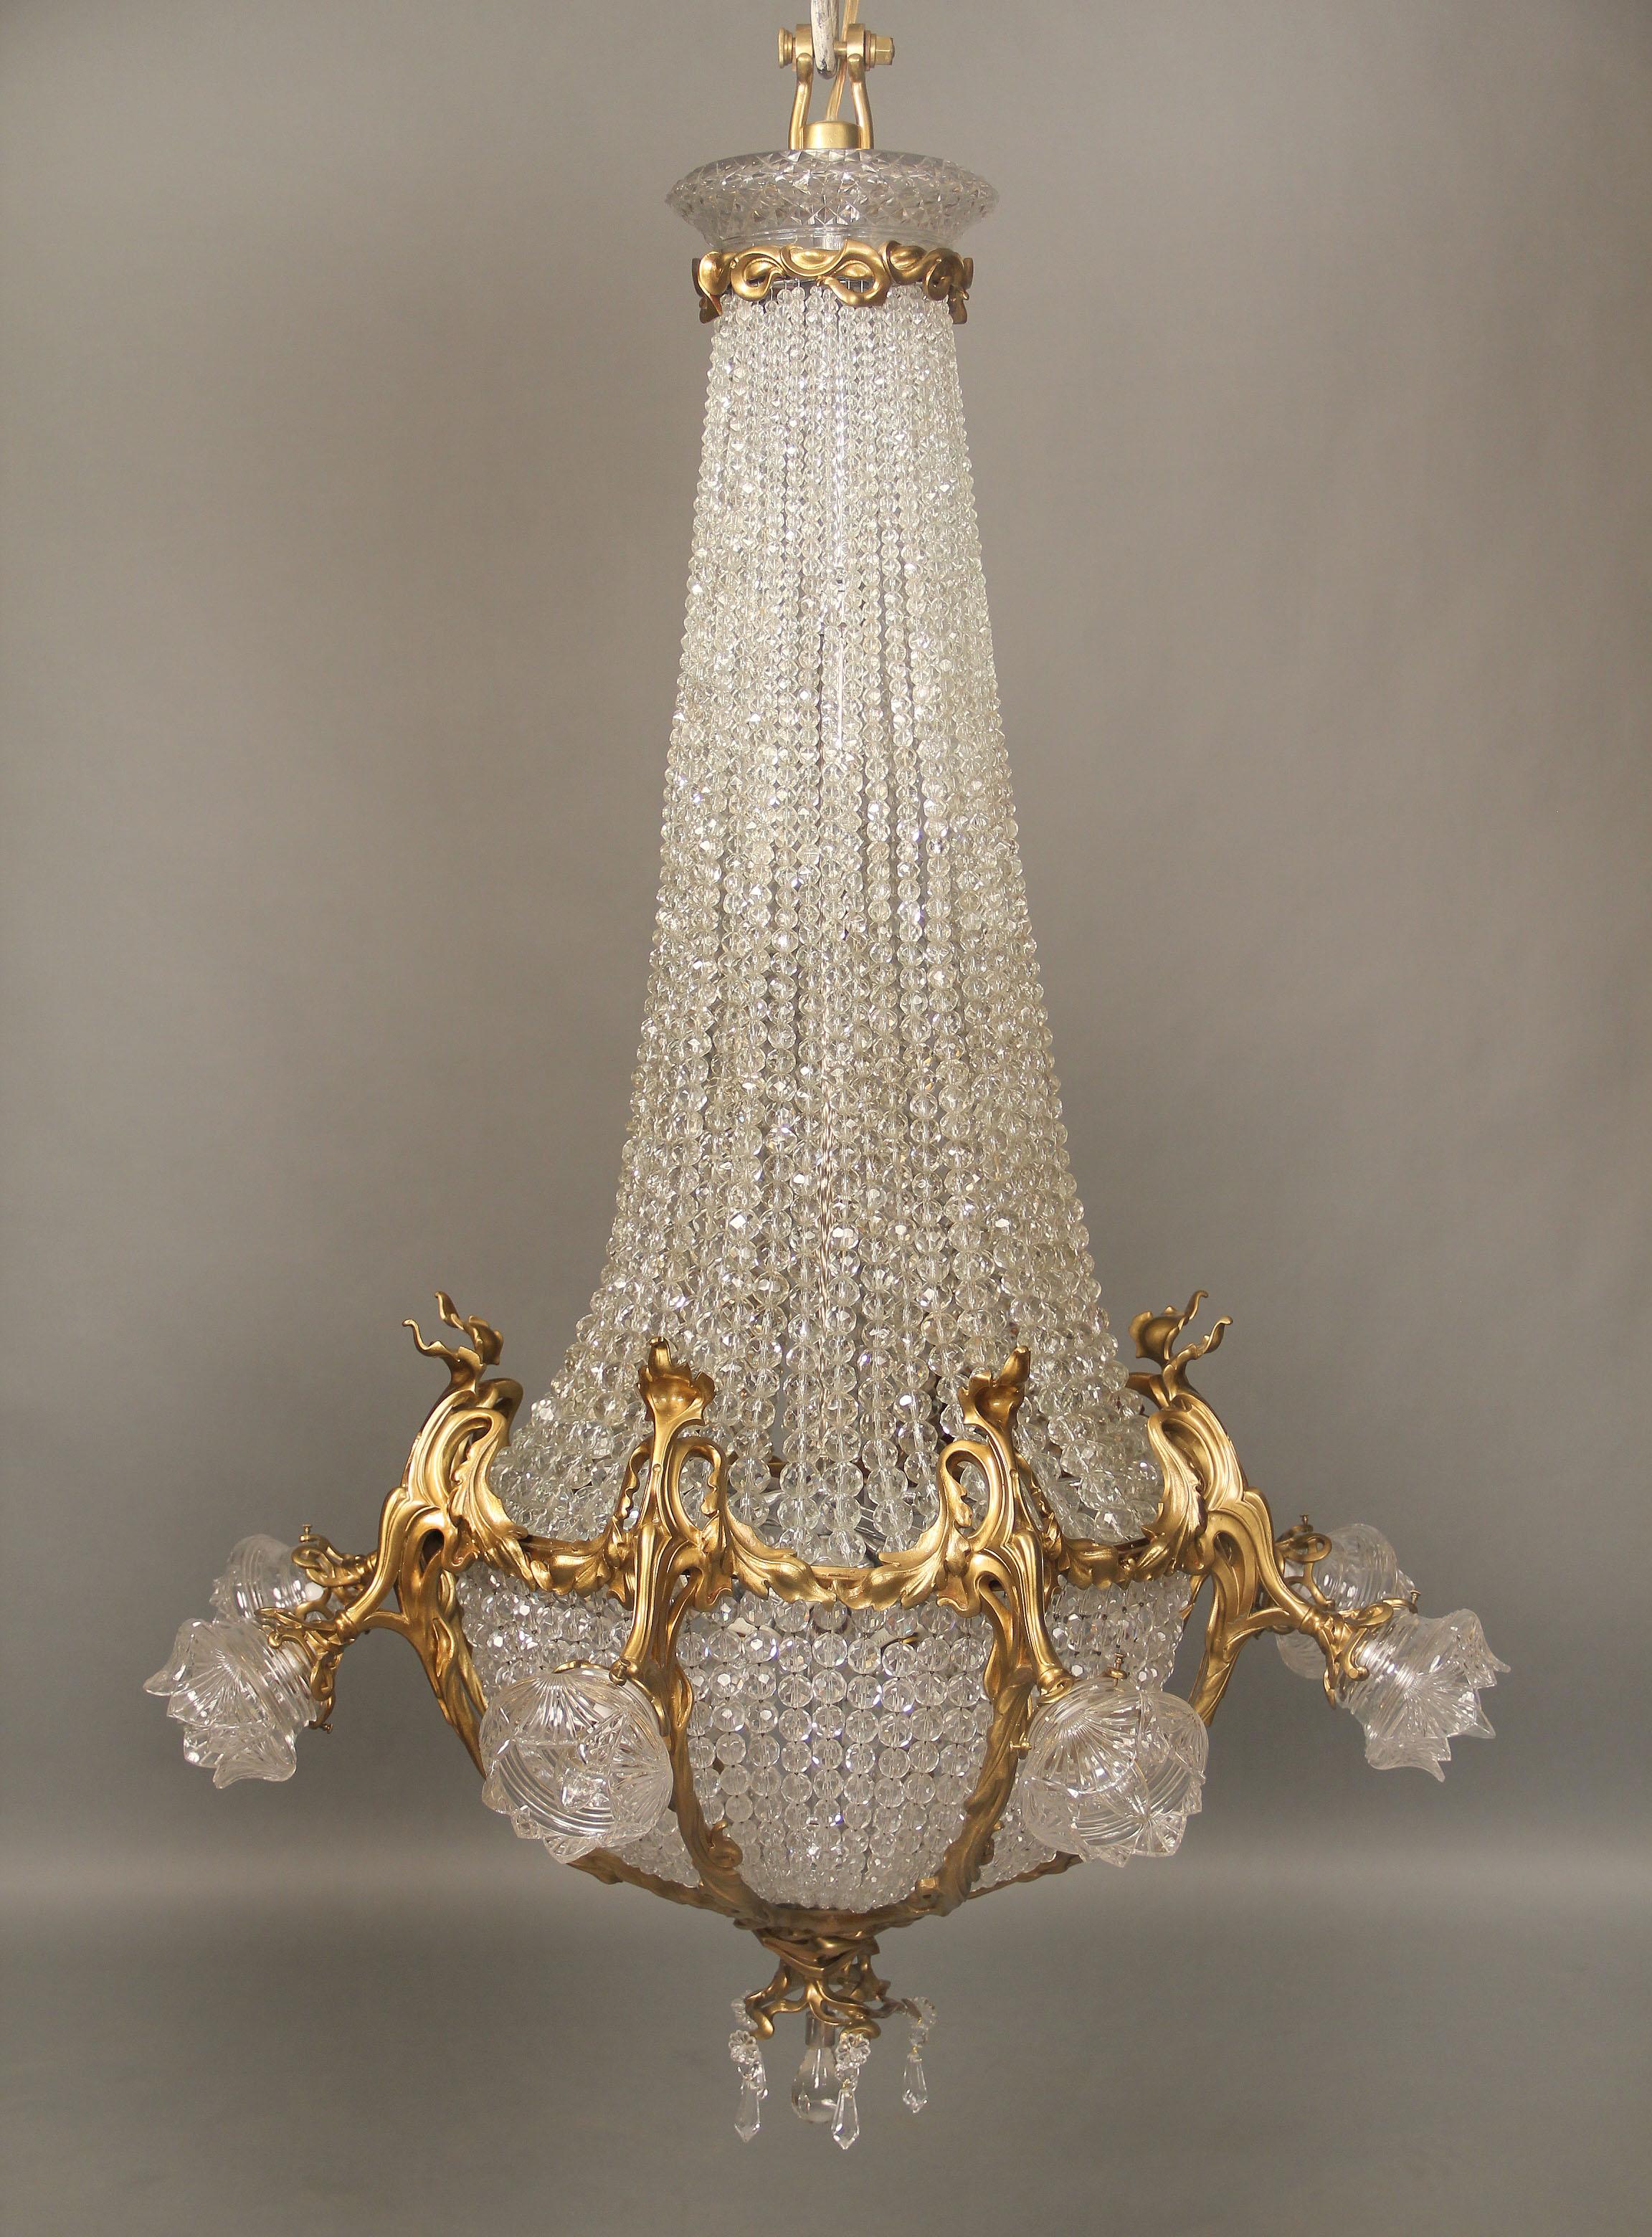 A nice early 20th century gilt bronze and crystal sixteen-light basket chandelier

The cut crystal top with a gilt bronze rim, beaded strings run down to the basket, the base with a crystal bulb and drop crystals, eight perimeter bronze arms with